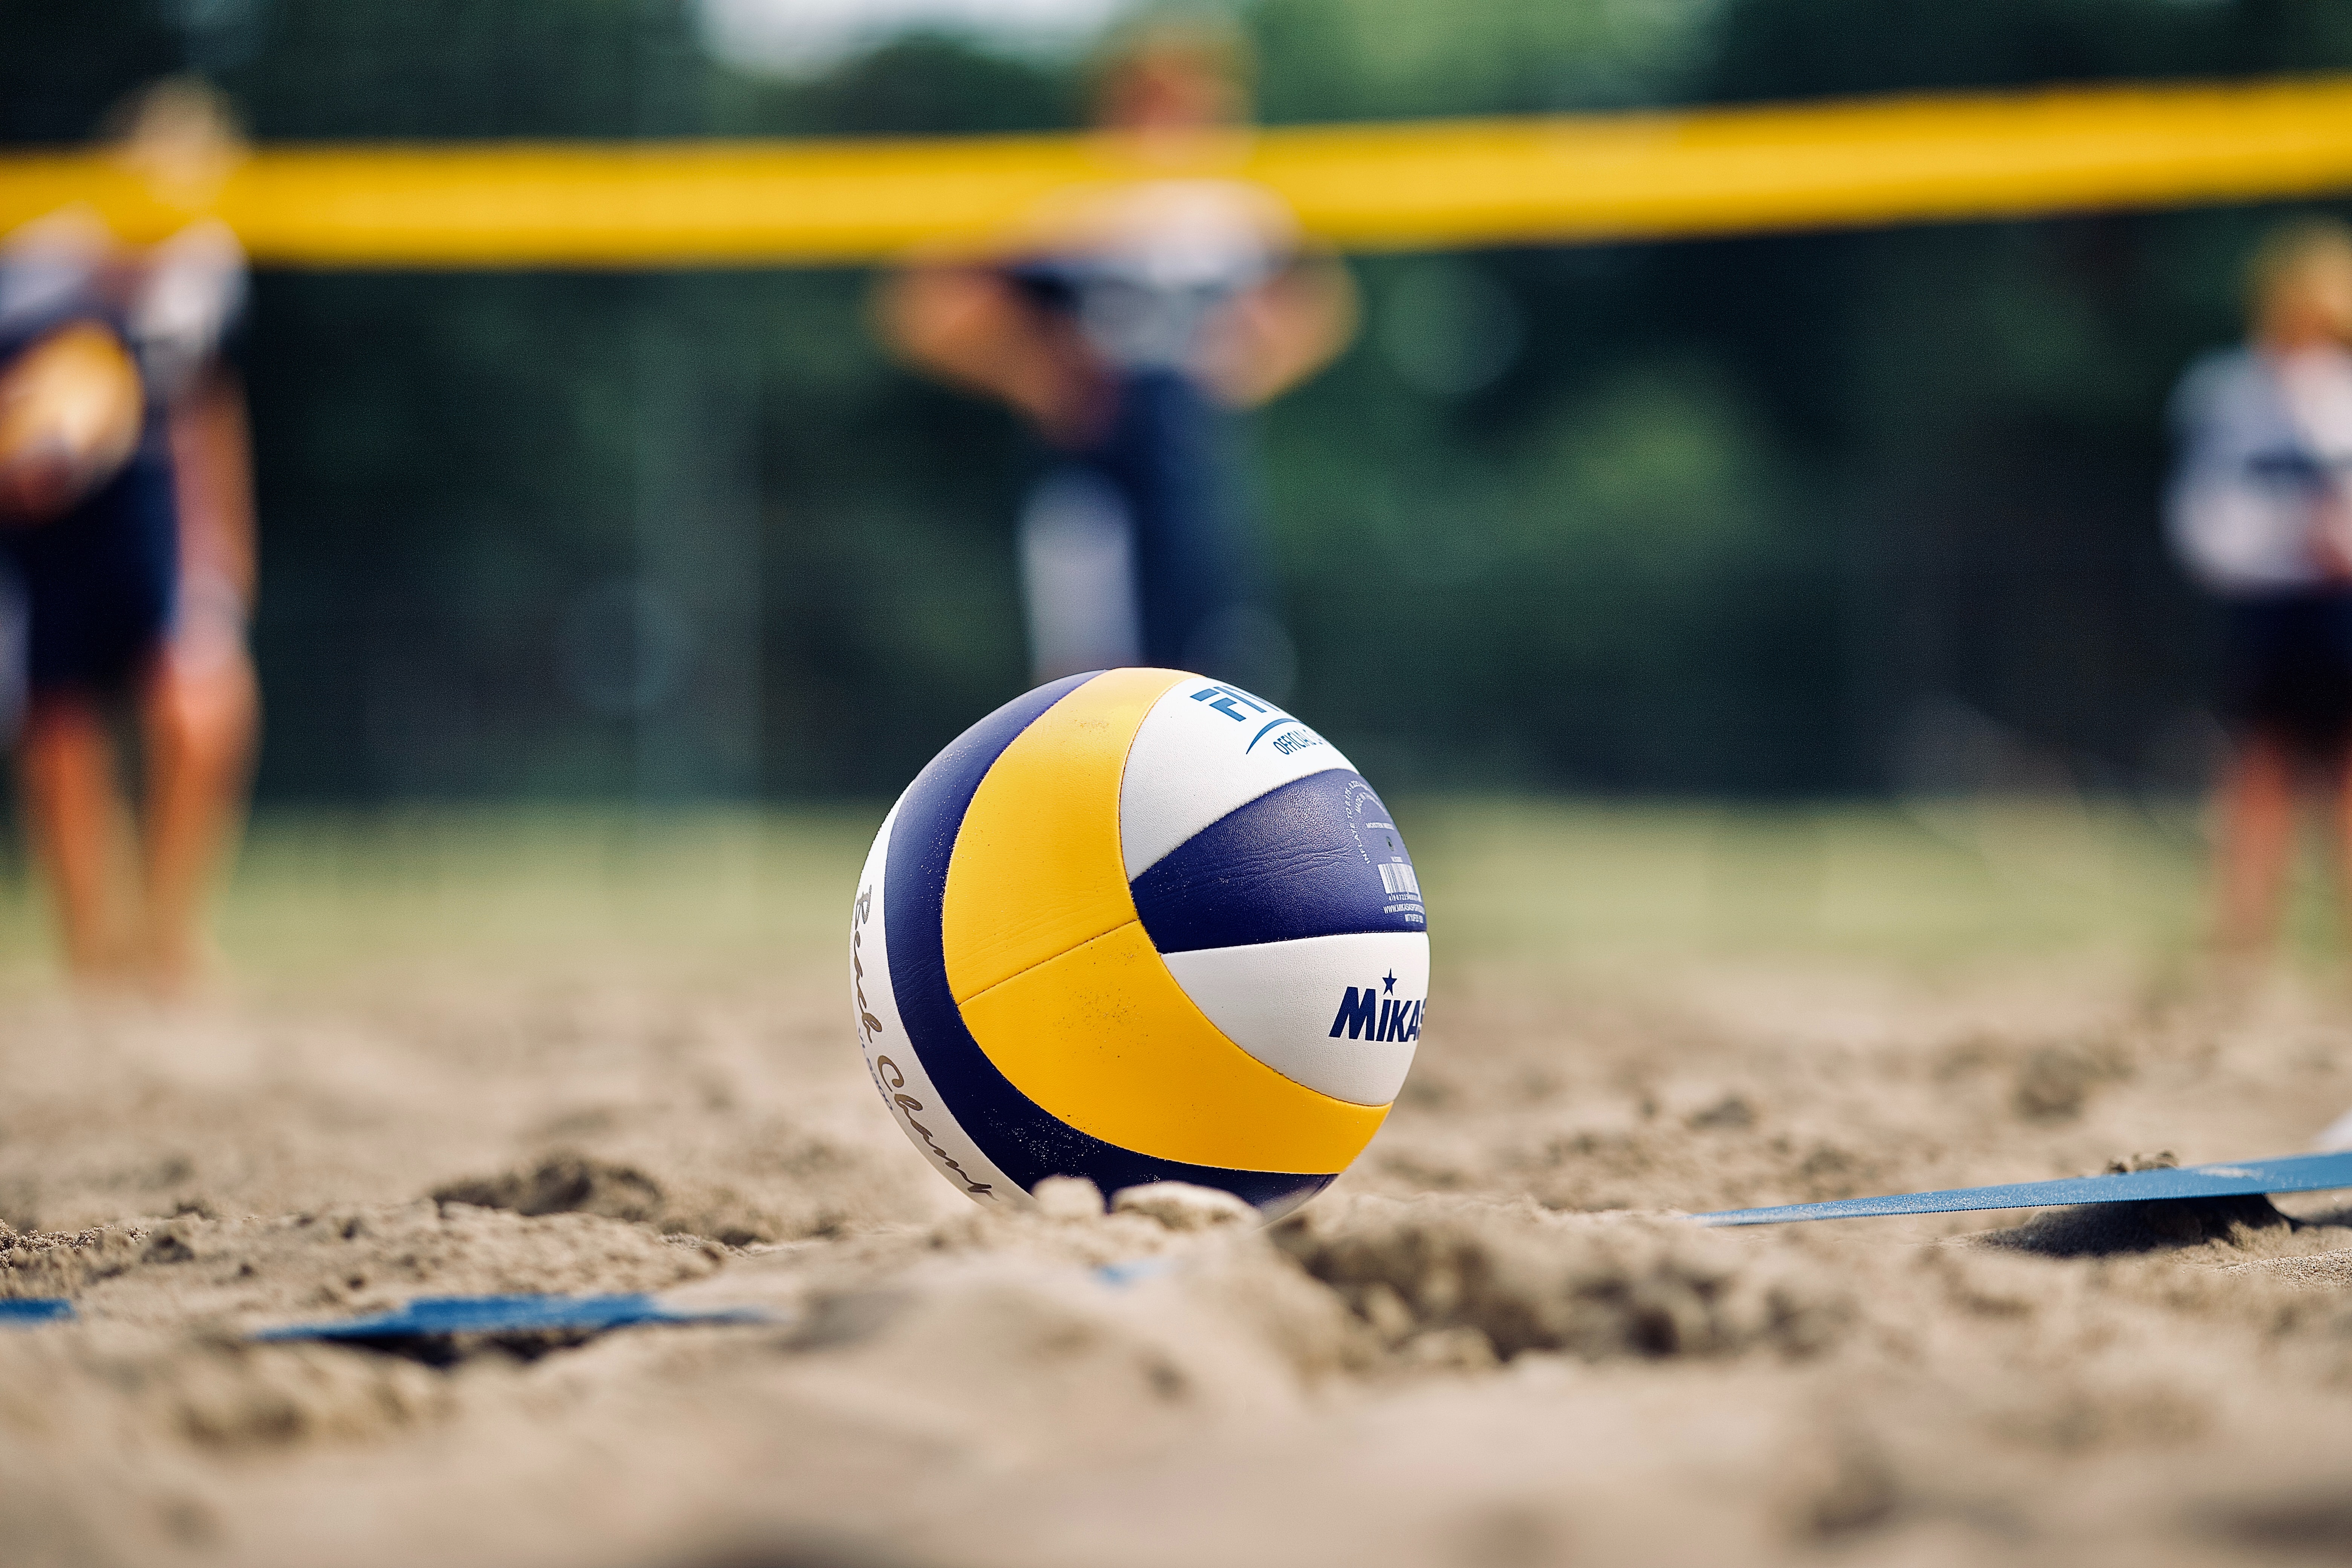 The best volleyball tournaments to bet on